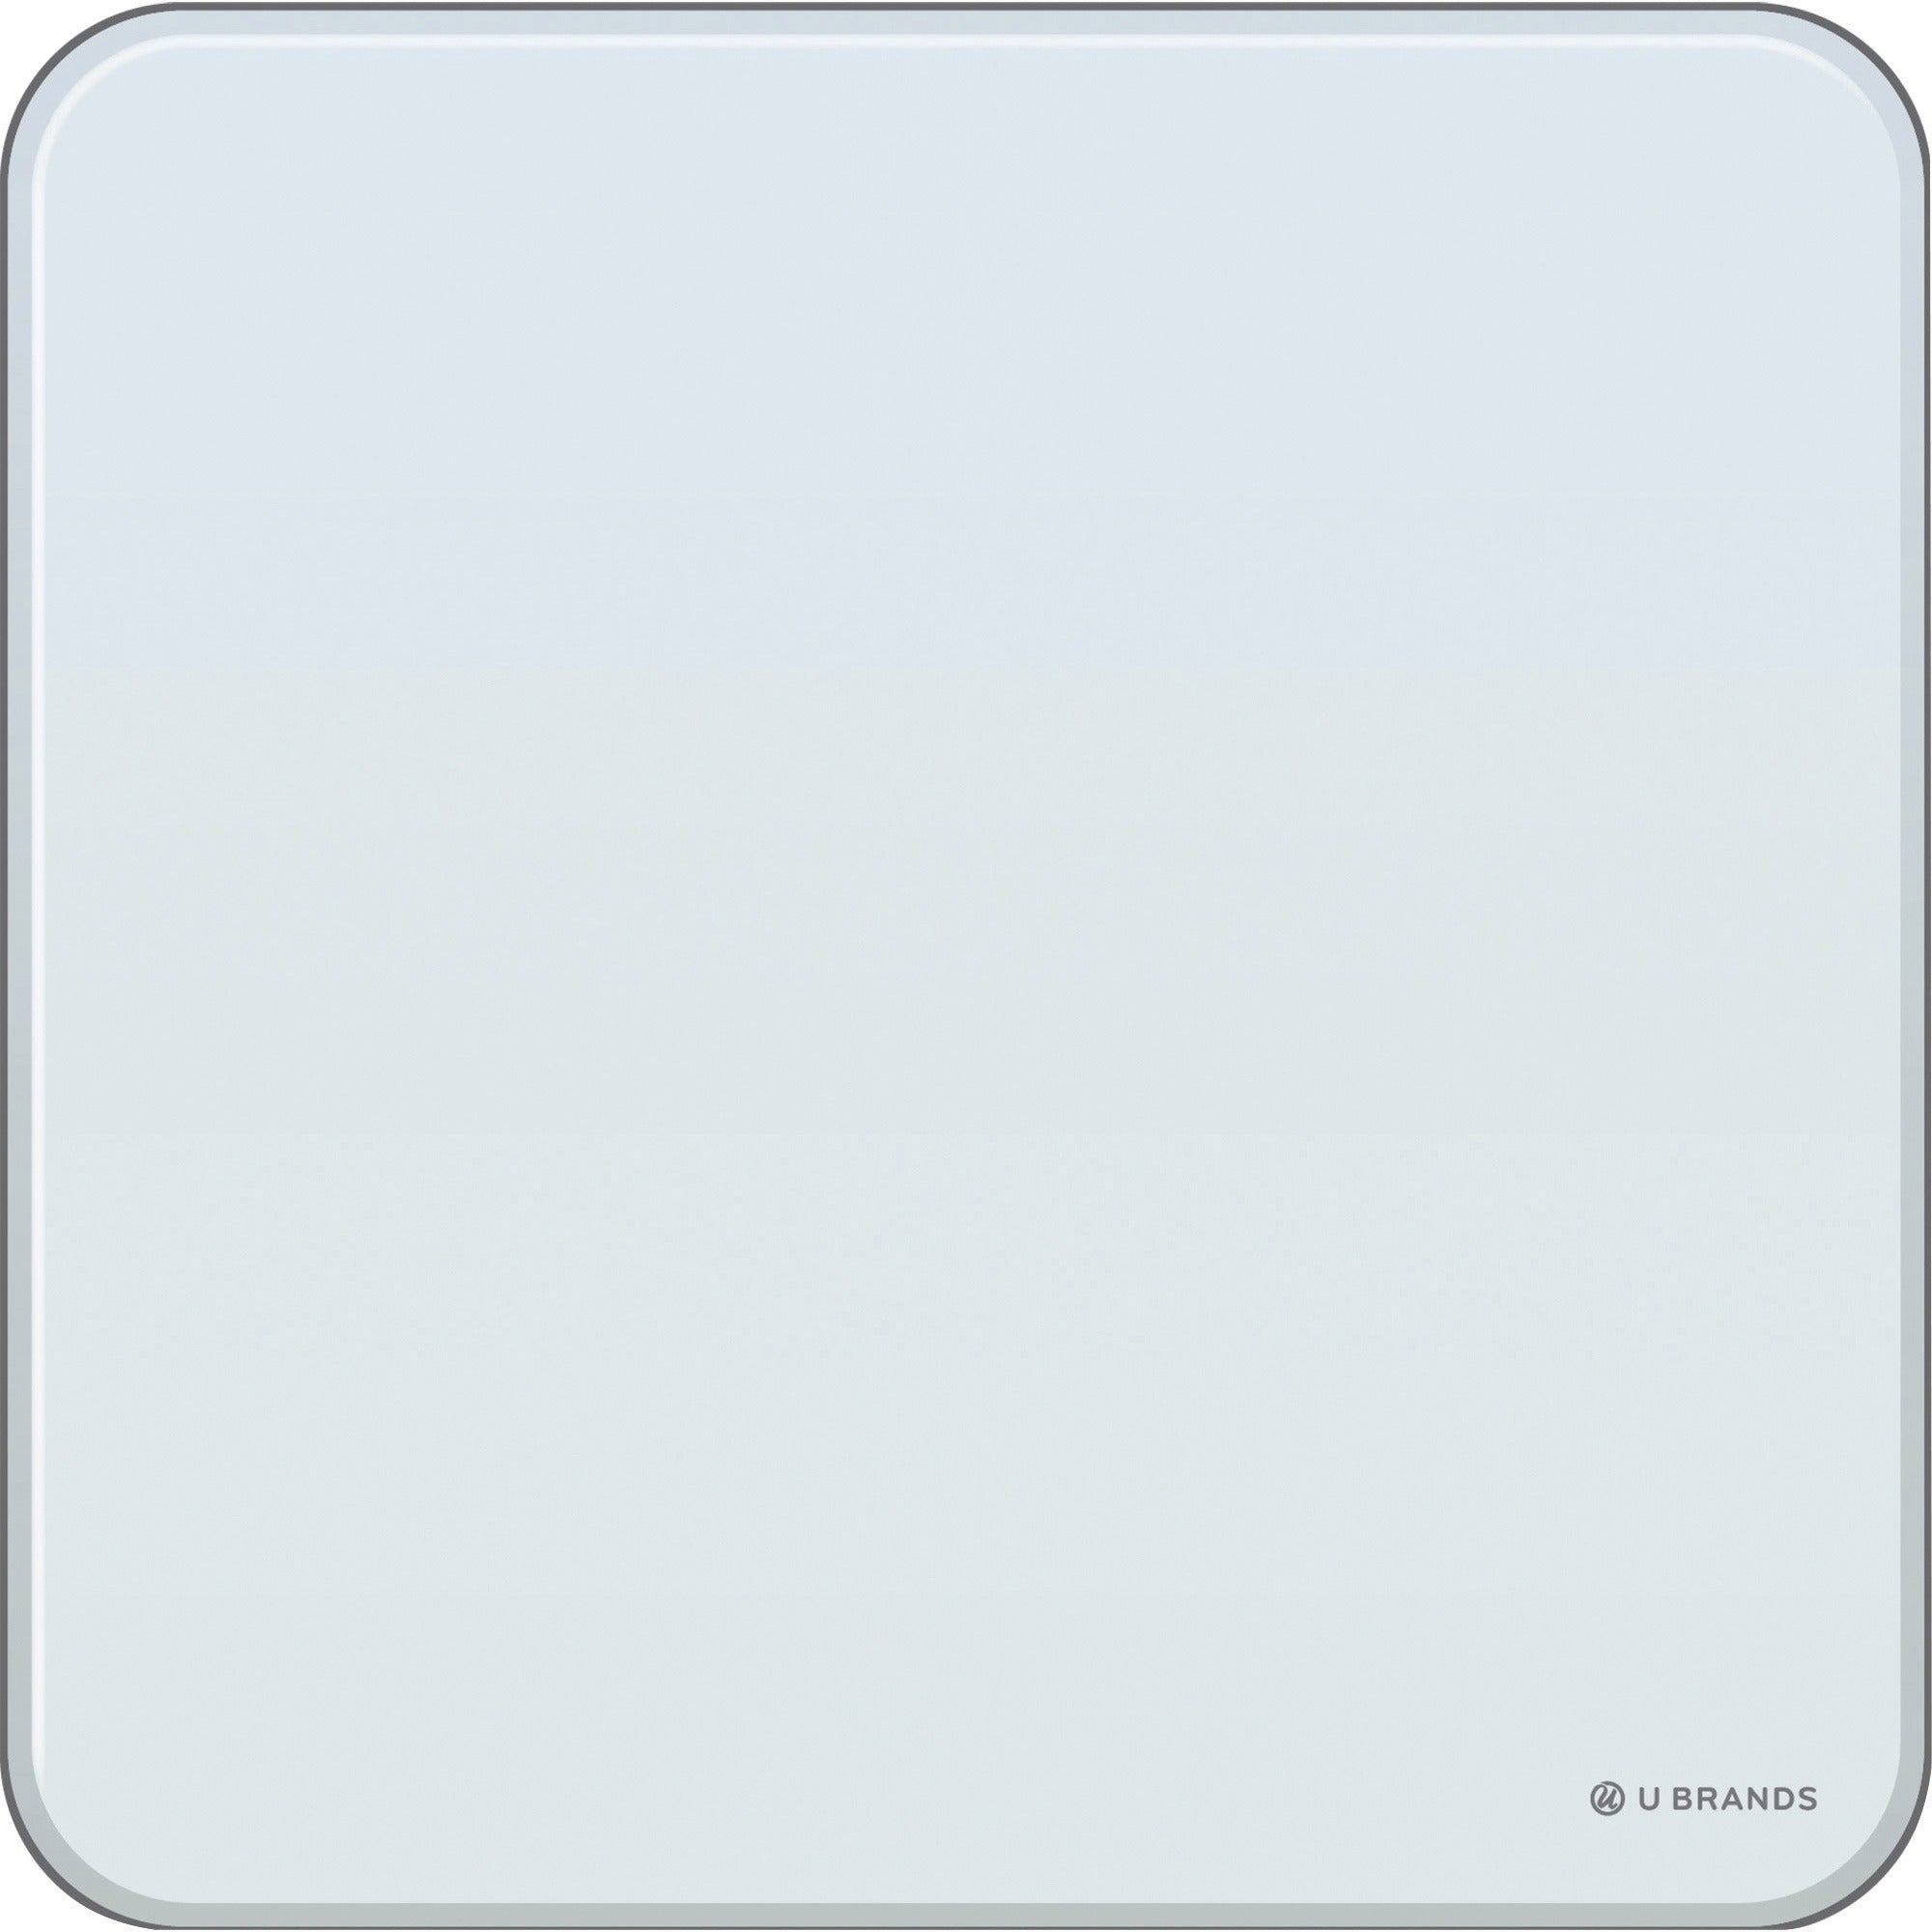 u-brands-square-magnetic-glass-dry-erase-board-12-1-ft-width-x-12-1-ft-height-frosted-white-tempered-glass-surface-square-horizontal-magnetic-1-each_ubr2343u0001 - 1